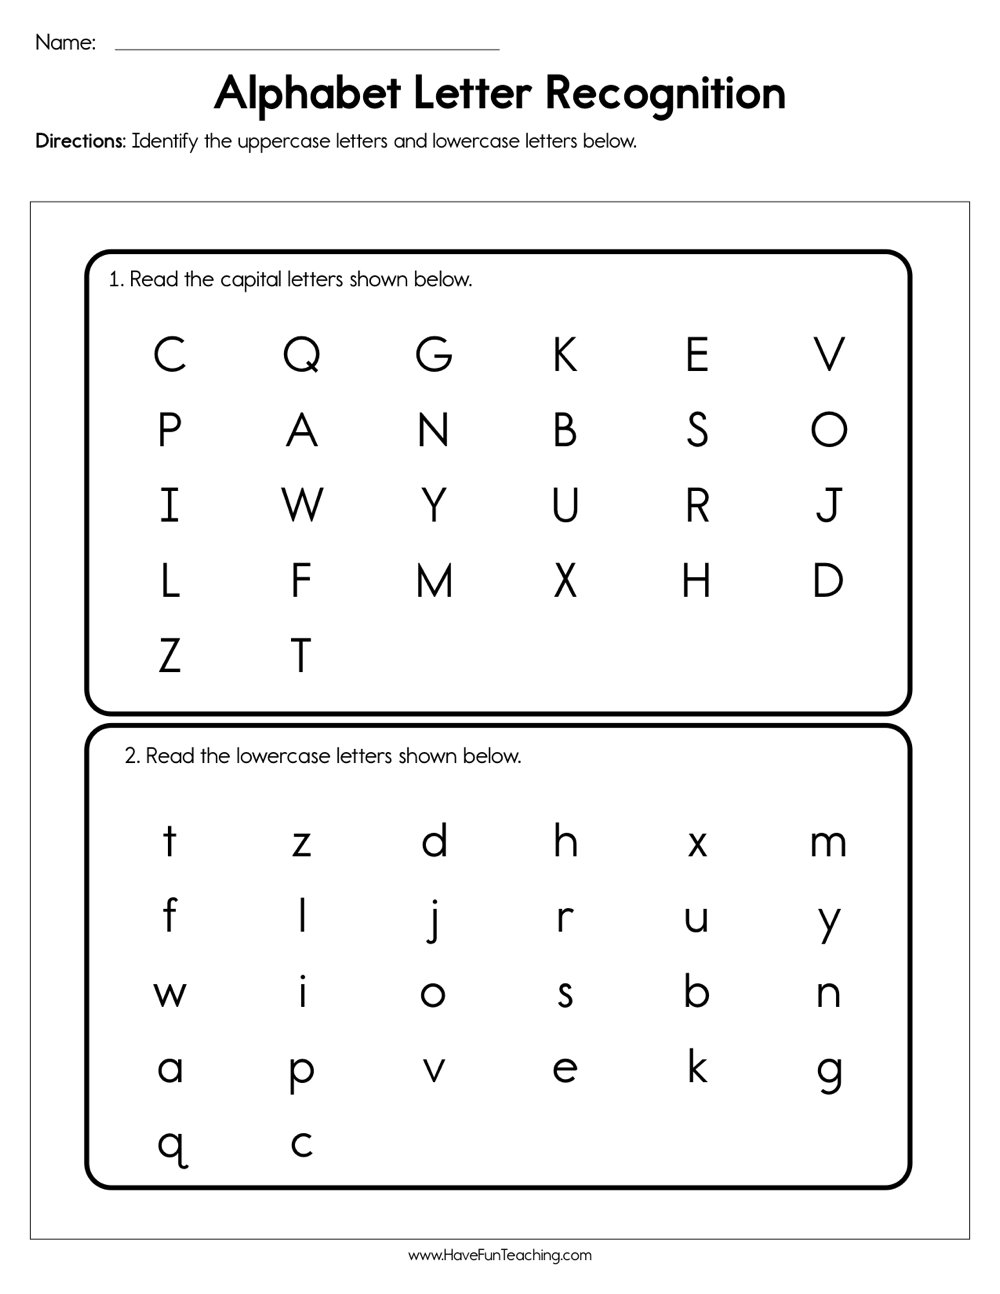 Alphabet Letter Recognition Assessment Have Fun Teaching intended for Alphabet Recognition Worksheets Free